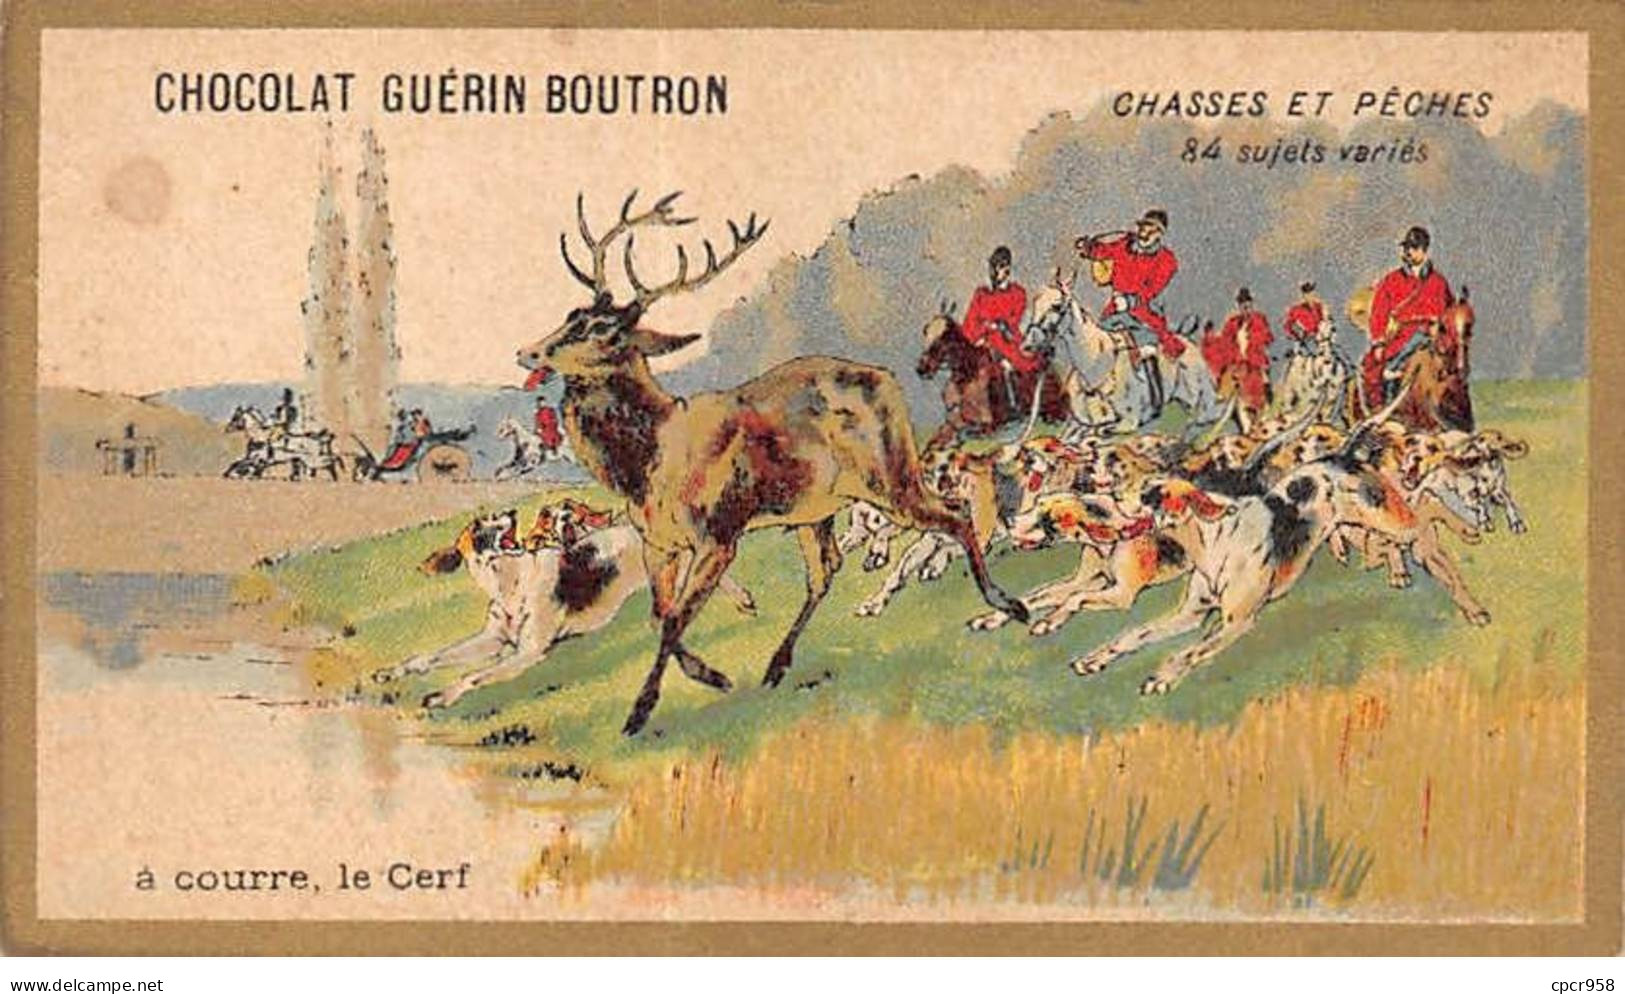 Chromos -COR10598 - Chocolat Guérin-Boutron- Chasses Et Pêches-Courre- Cerf- Chevaux- Chiens -Chasseurs - 6x10 Cm Env. - Guérin-Boutron